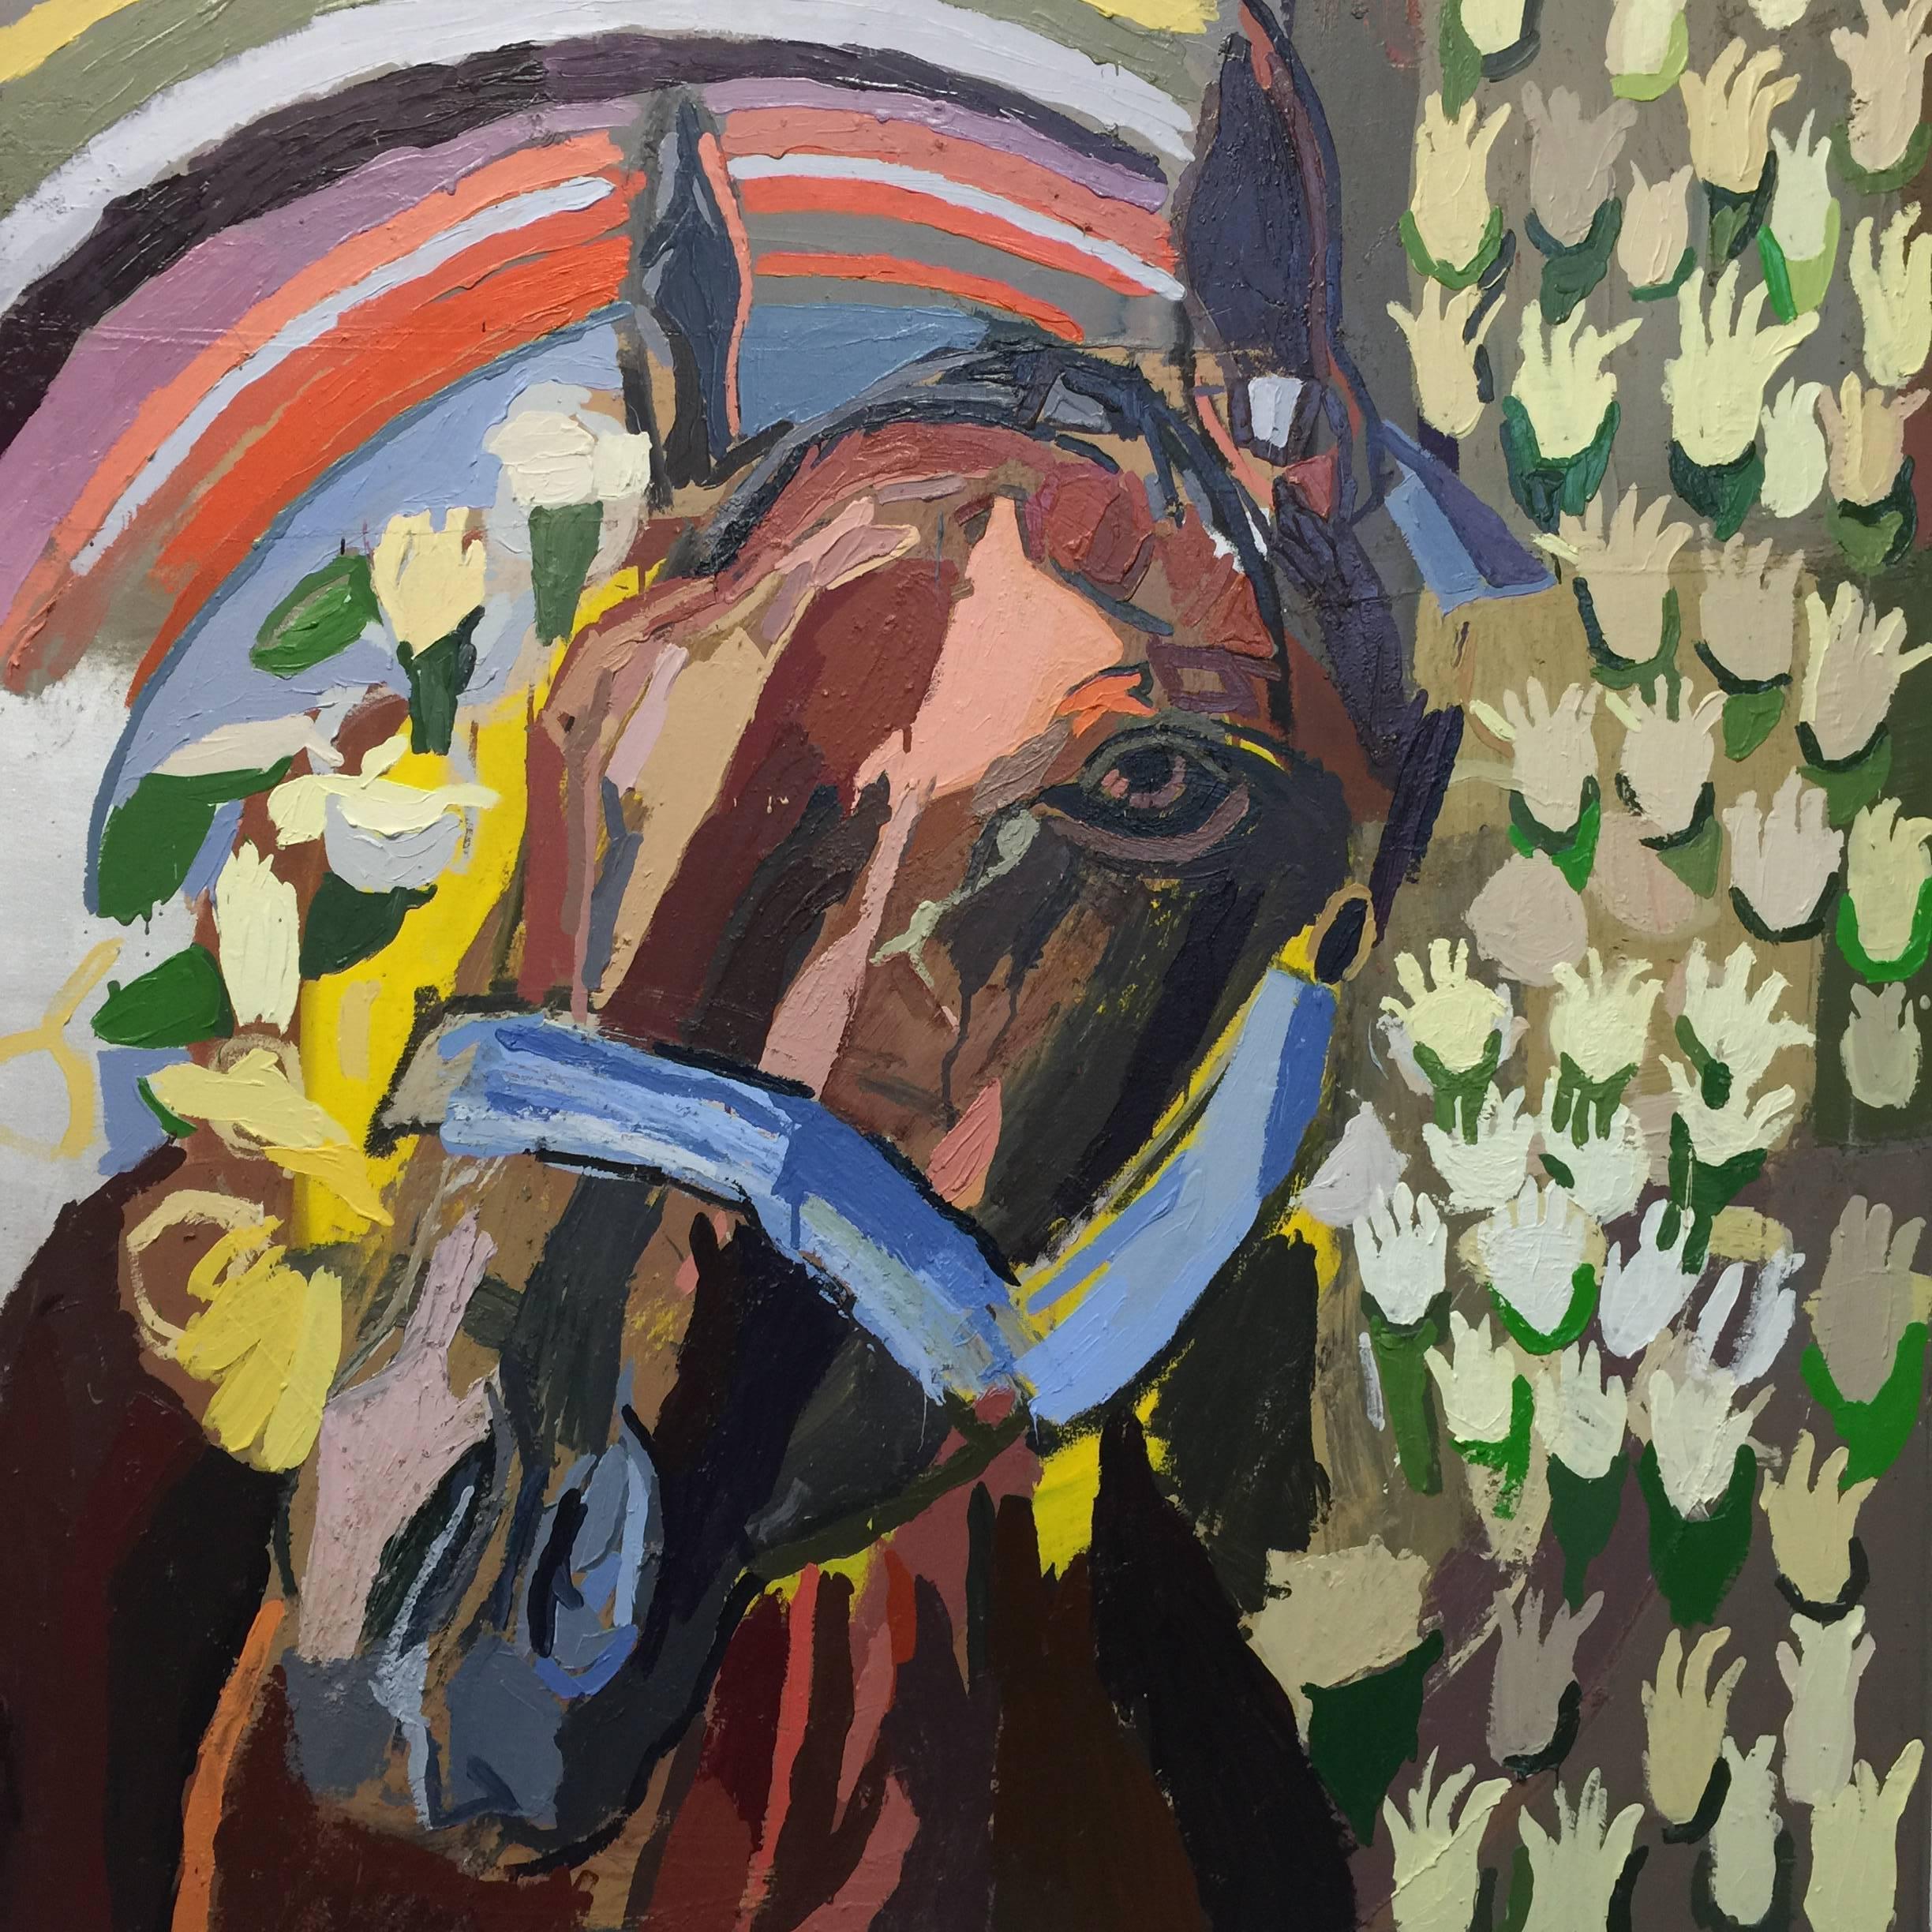 American Pharoah Oil Painting by New York City Artist Clintel Steed, 2015 For Sale 3